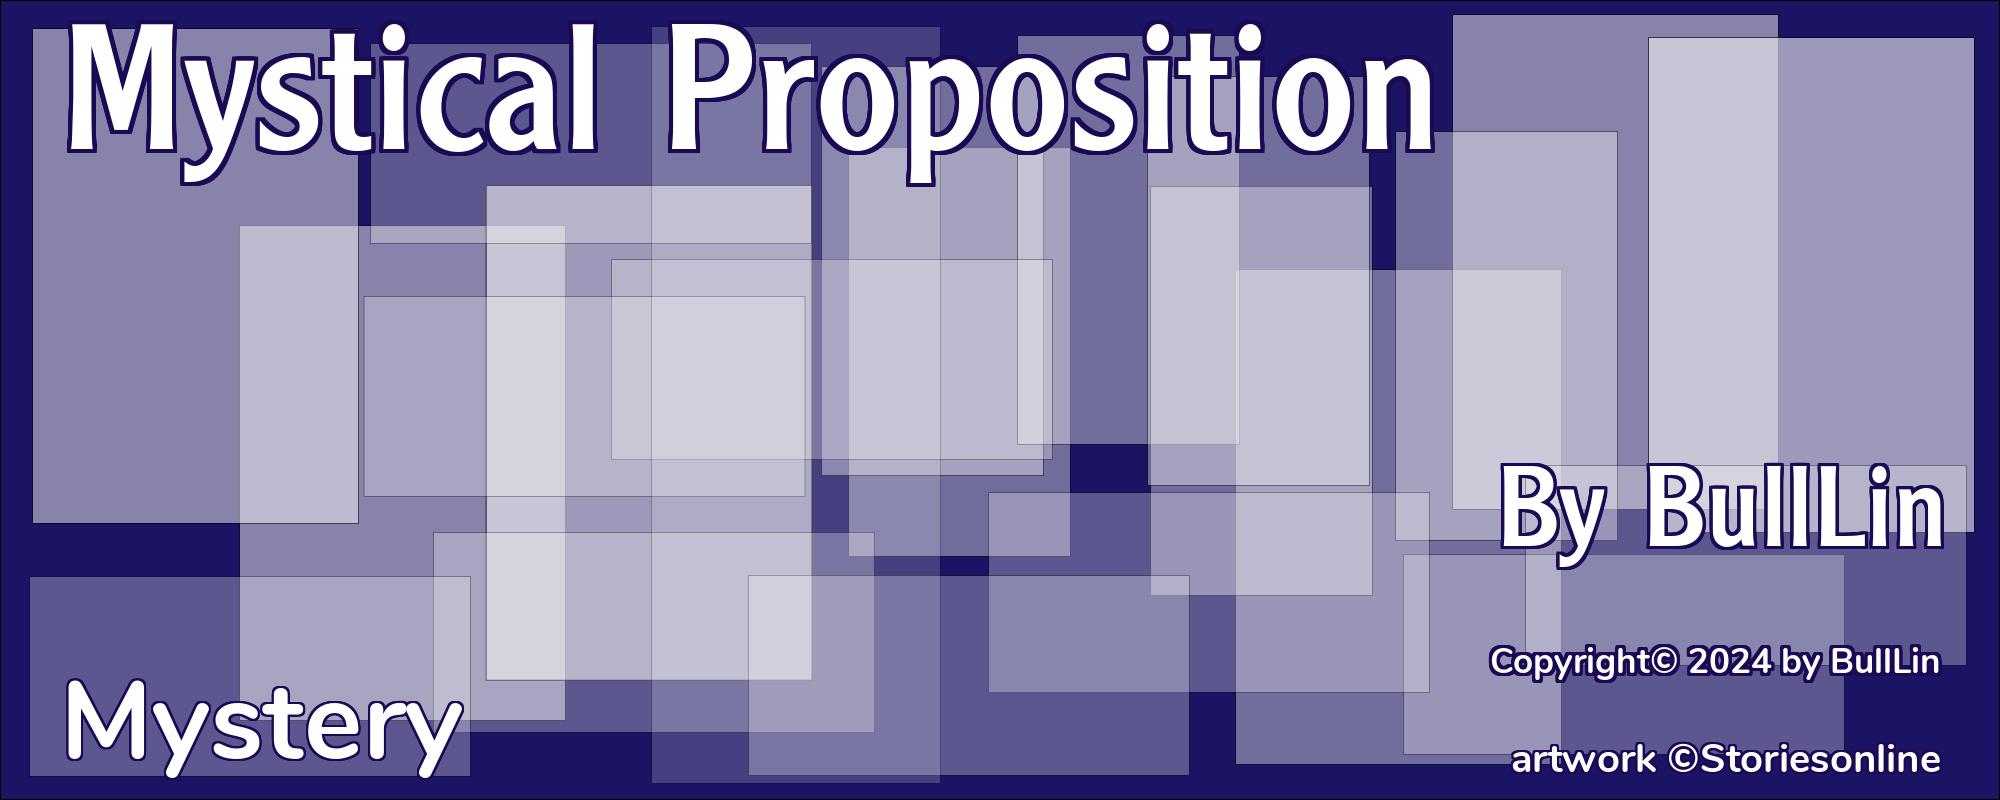 Mystical Proposition - Cover